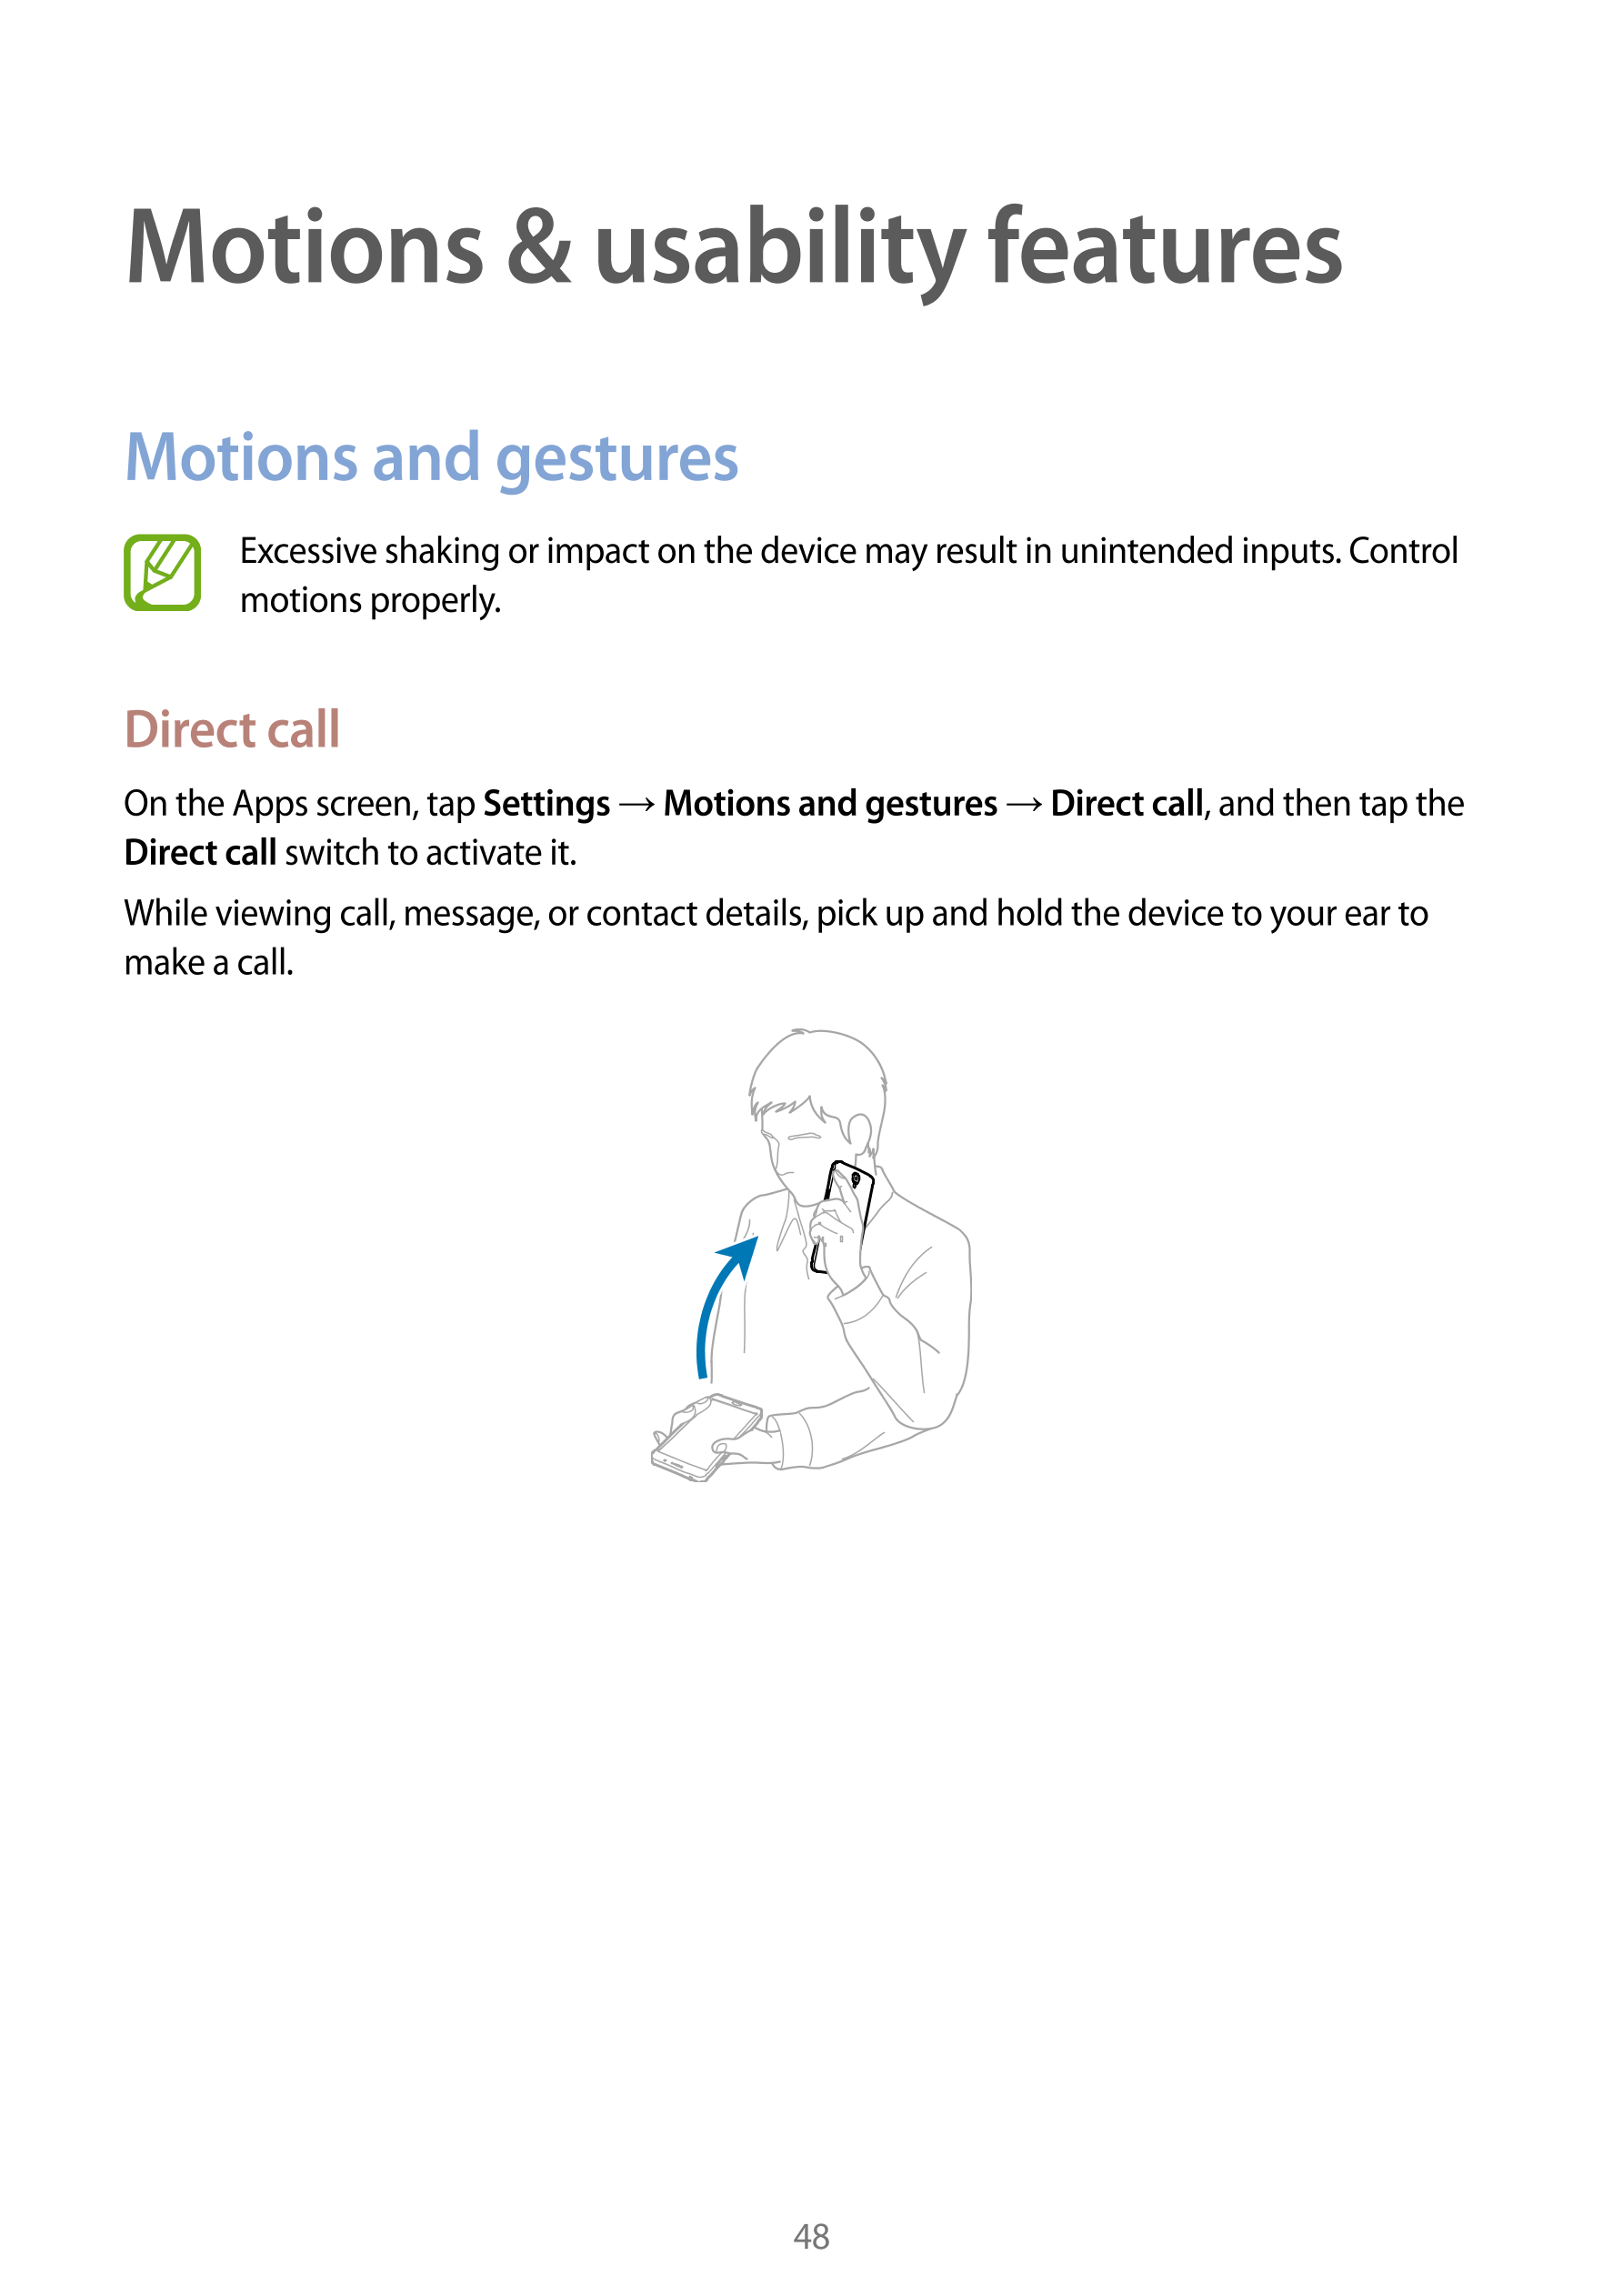 Motions & usability features
Motions and gestures
Excessive shaking or impact on the device may result in unintended inputs. Con